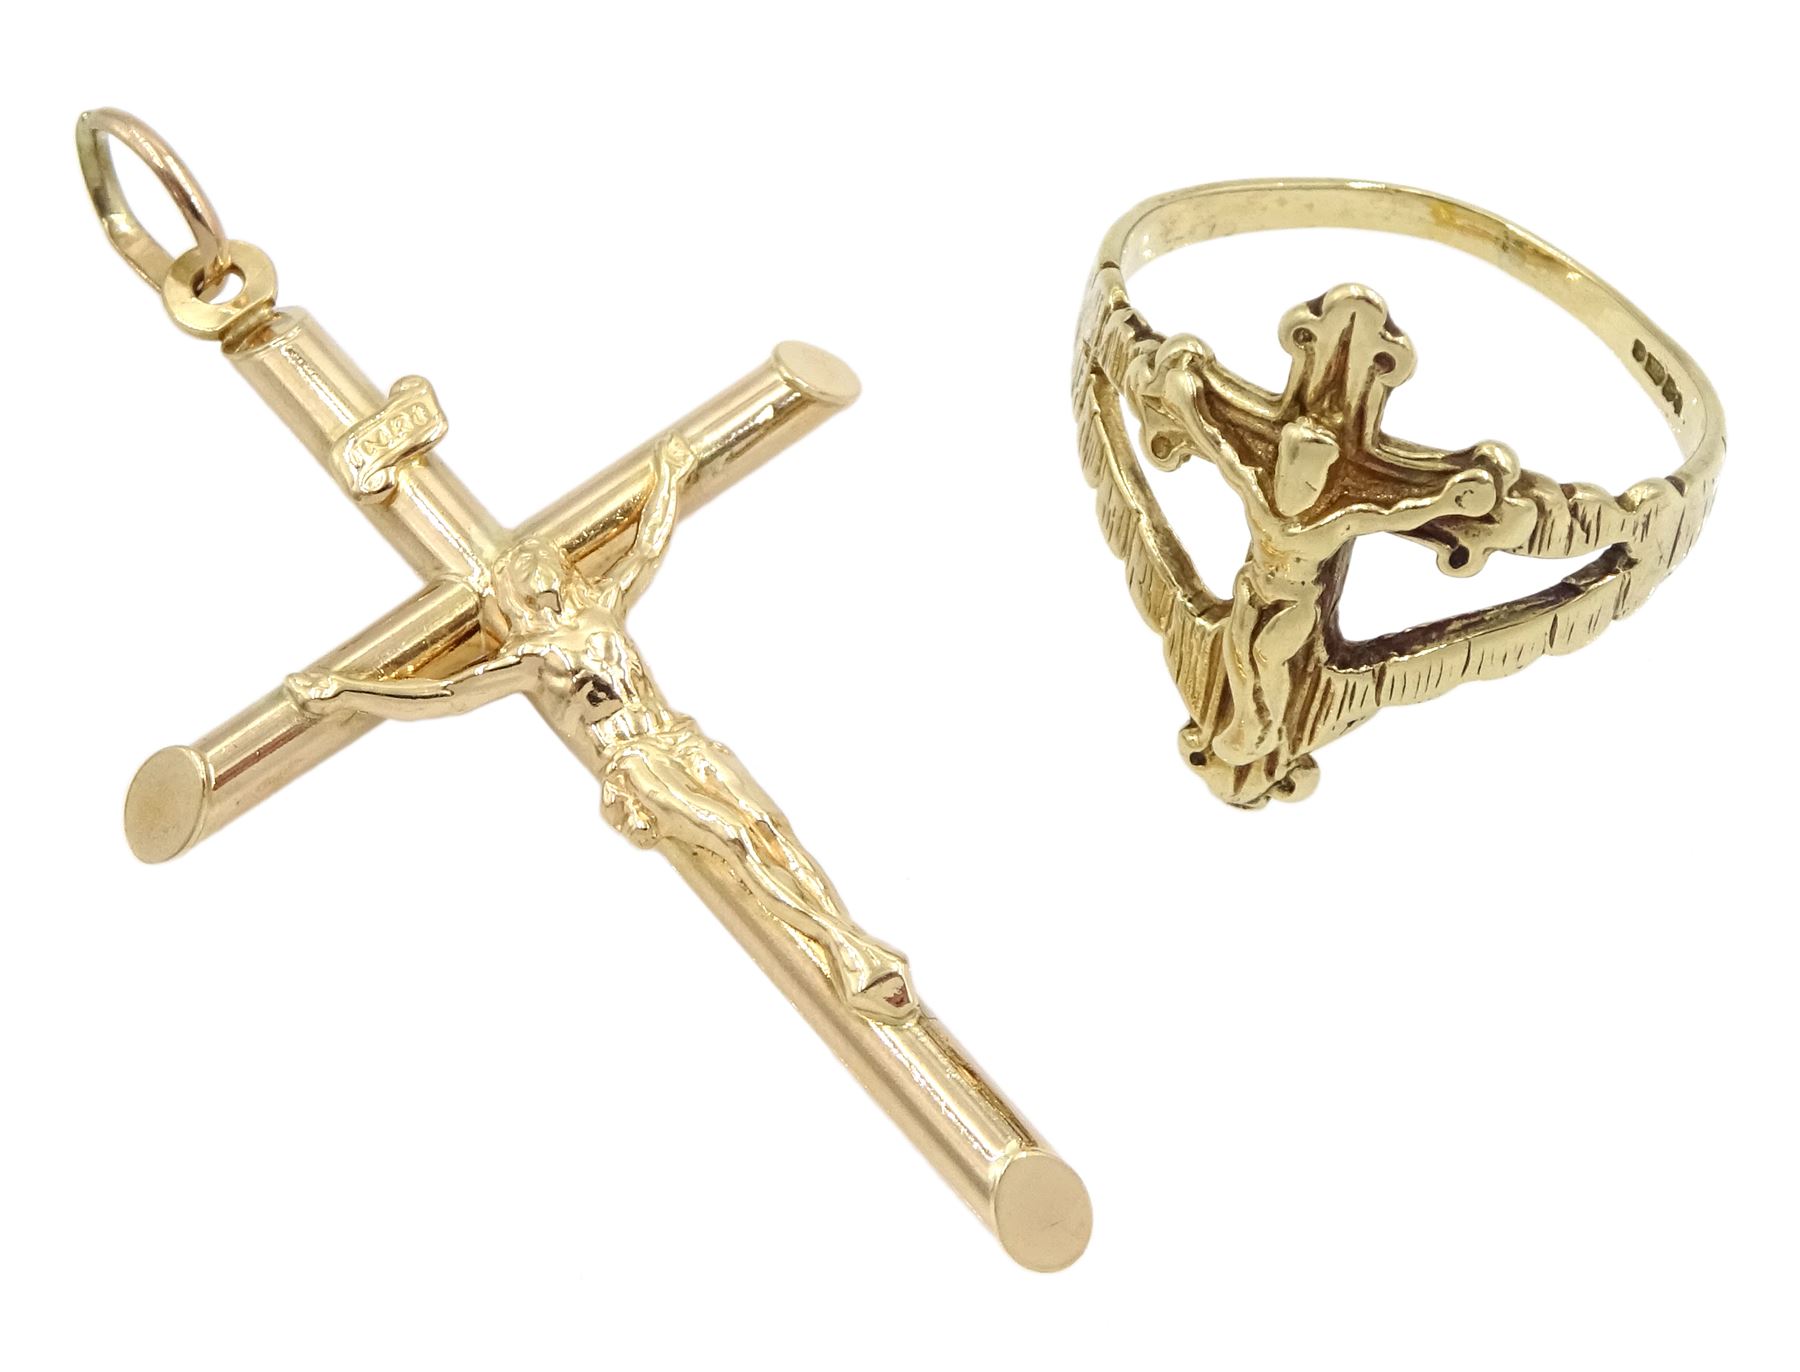 Gold cross pendant and gold cross ring